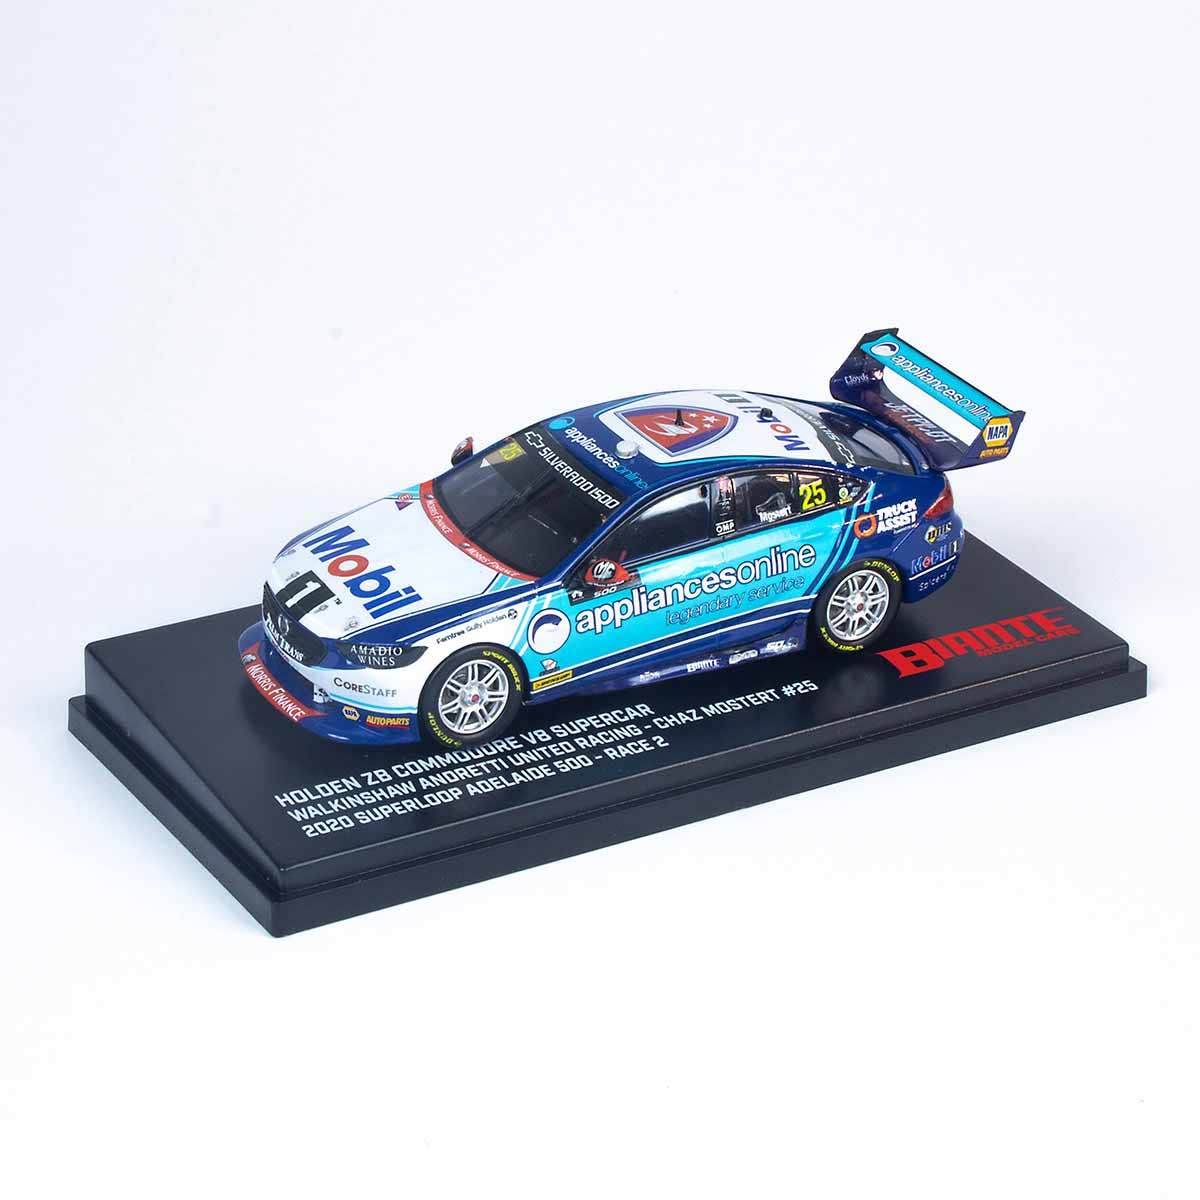 Holden ZB Commodore - Mobil 1 Appliances Online Racing - #25, C.Mostert - 2nd place, Race 2, Superloop Adelaide 500 - Diecast Model Car